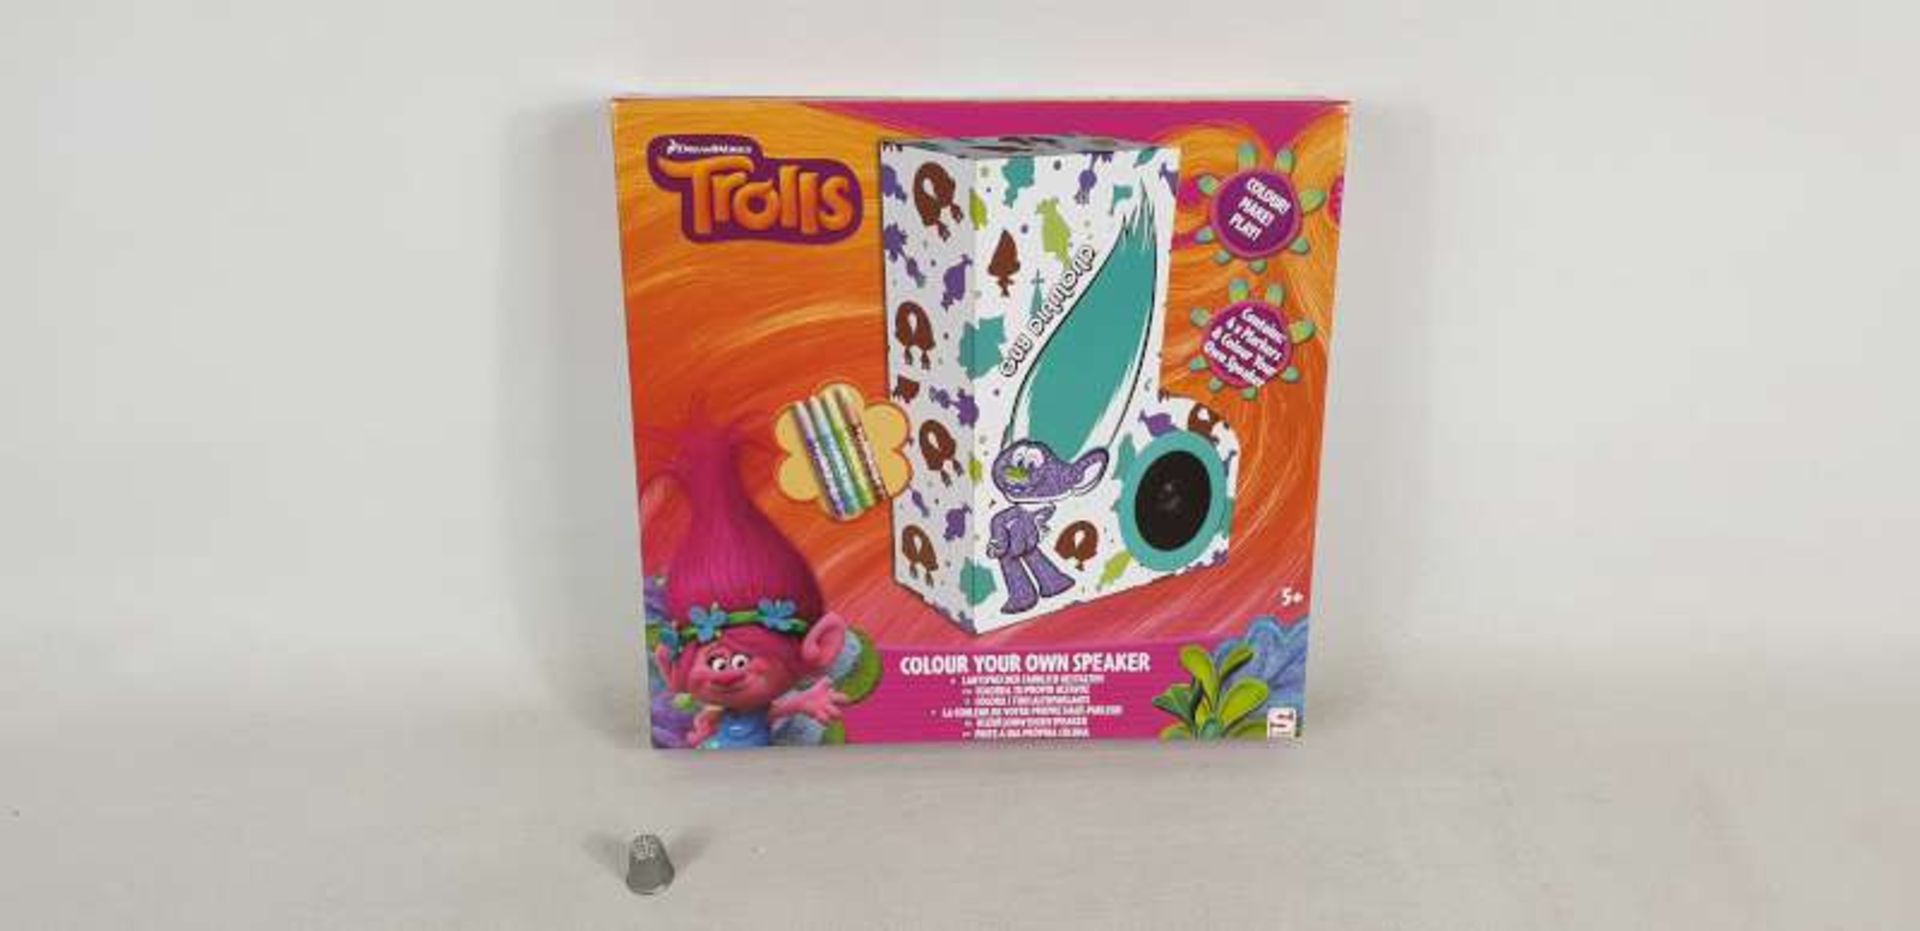 48 X BRAND NEW DREAMWORKS TROLLS COLOUR YOUR OWN SPEAKER IN 2 BOXES